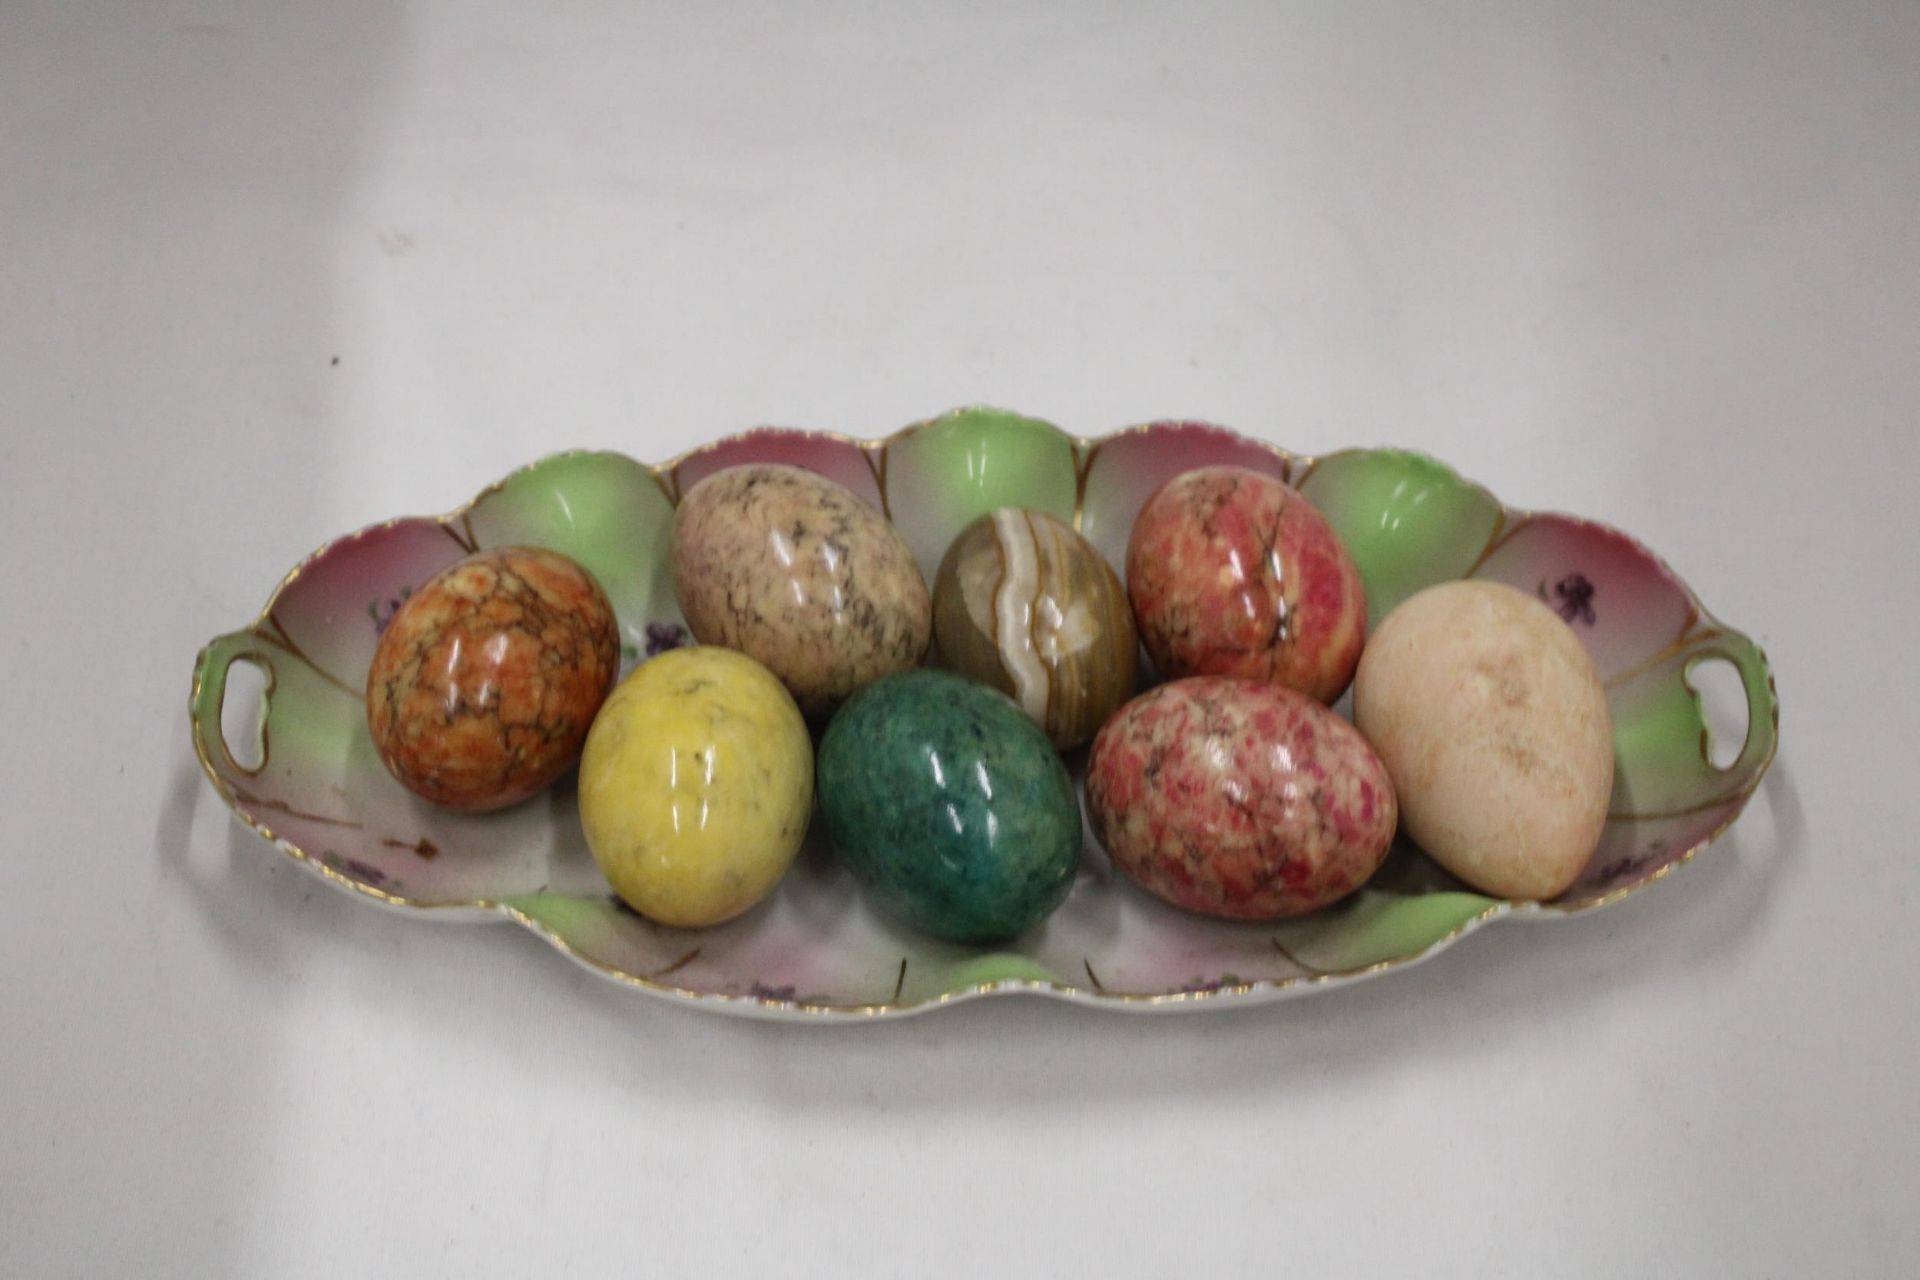 A COLLECTION OF 8 COLOURED MARBLE STYLE EGGS